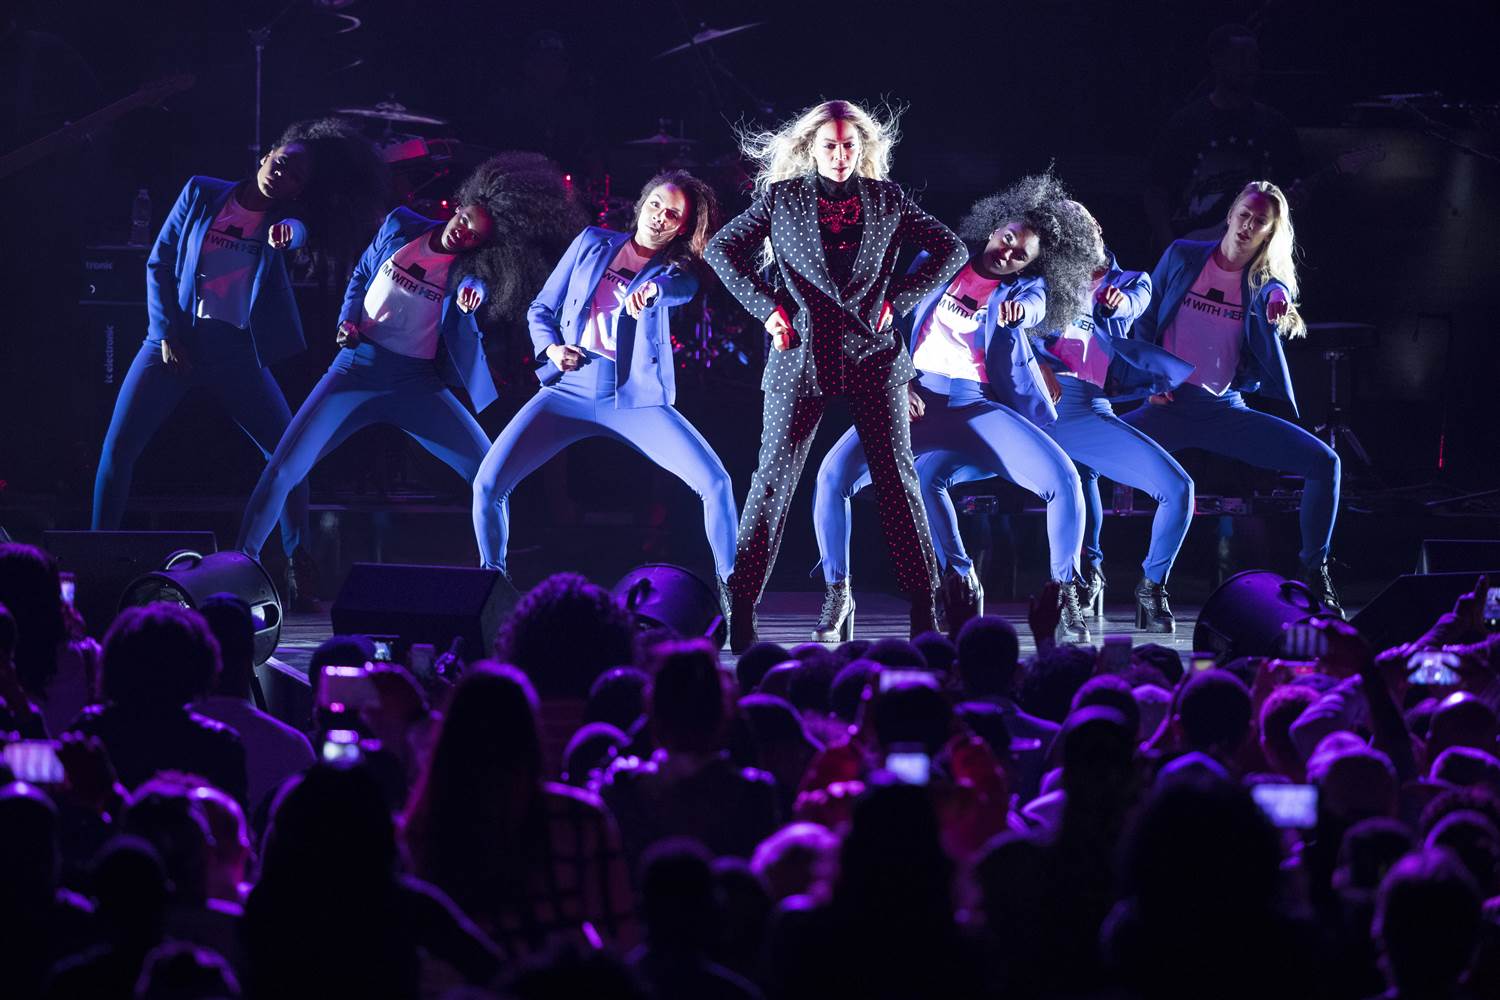 Beyoncé performed at a Get Out the Vote concert for Hilary Clinton, referencing Clinton's iconic look by costuming her backup dancers in blue pantsuits.  